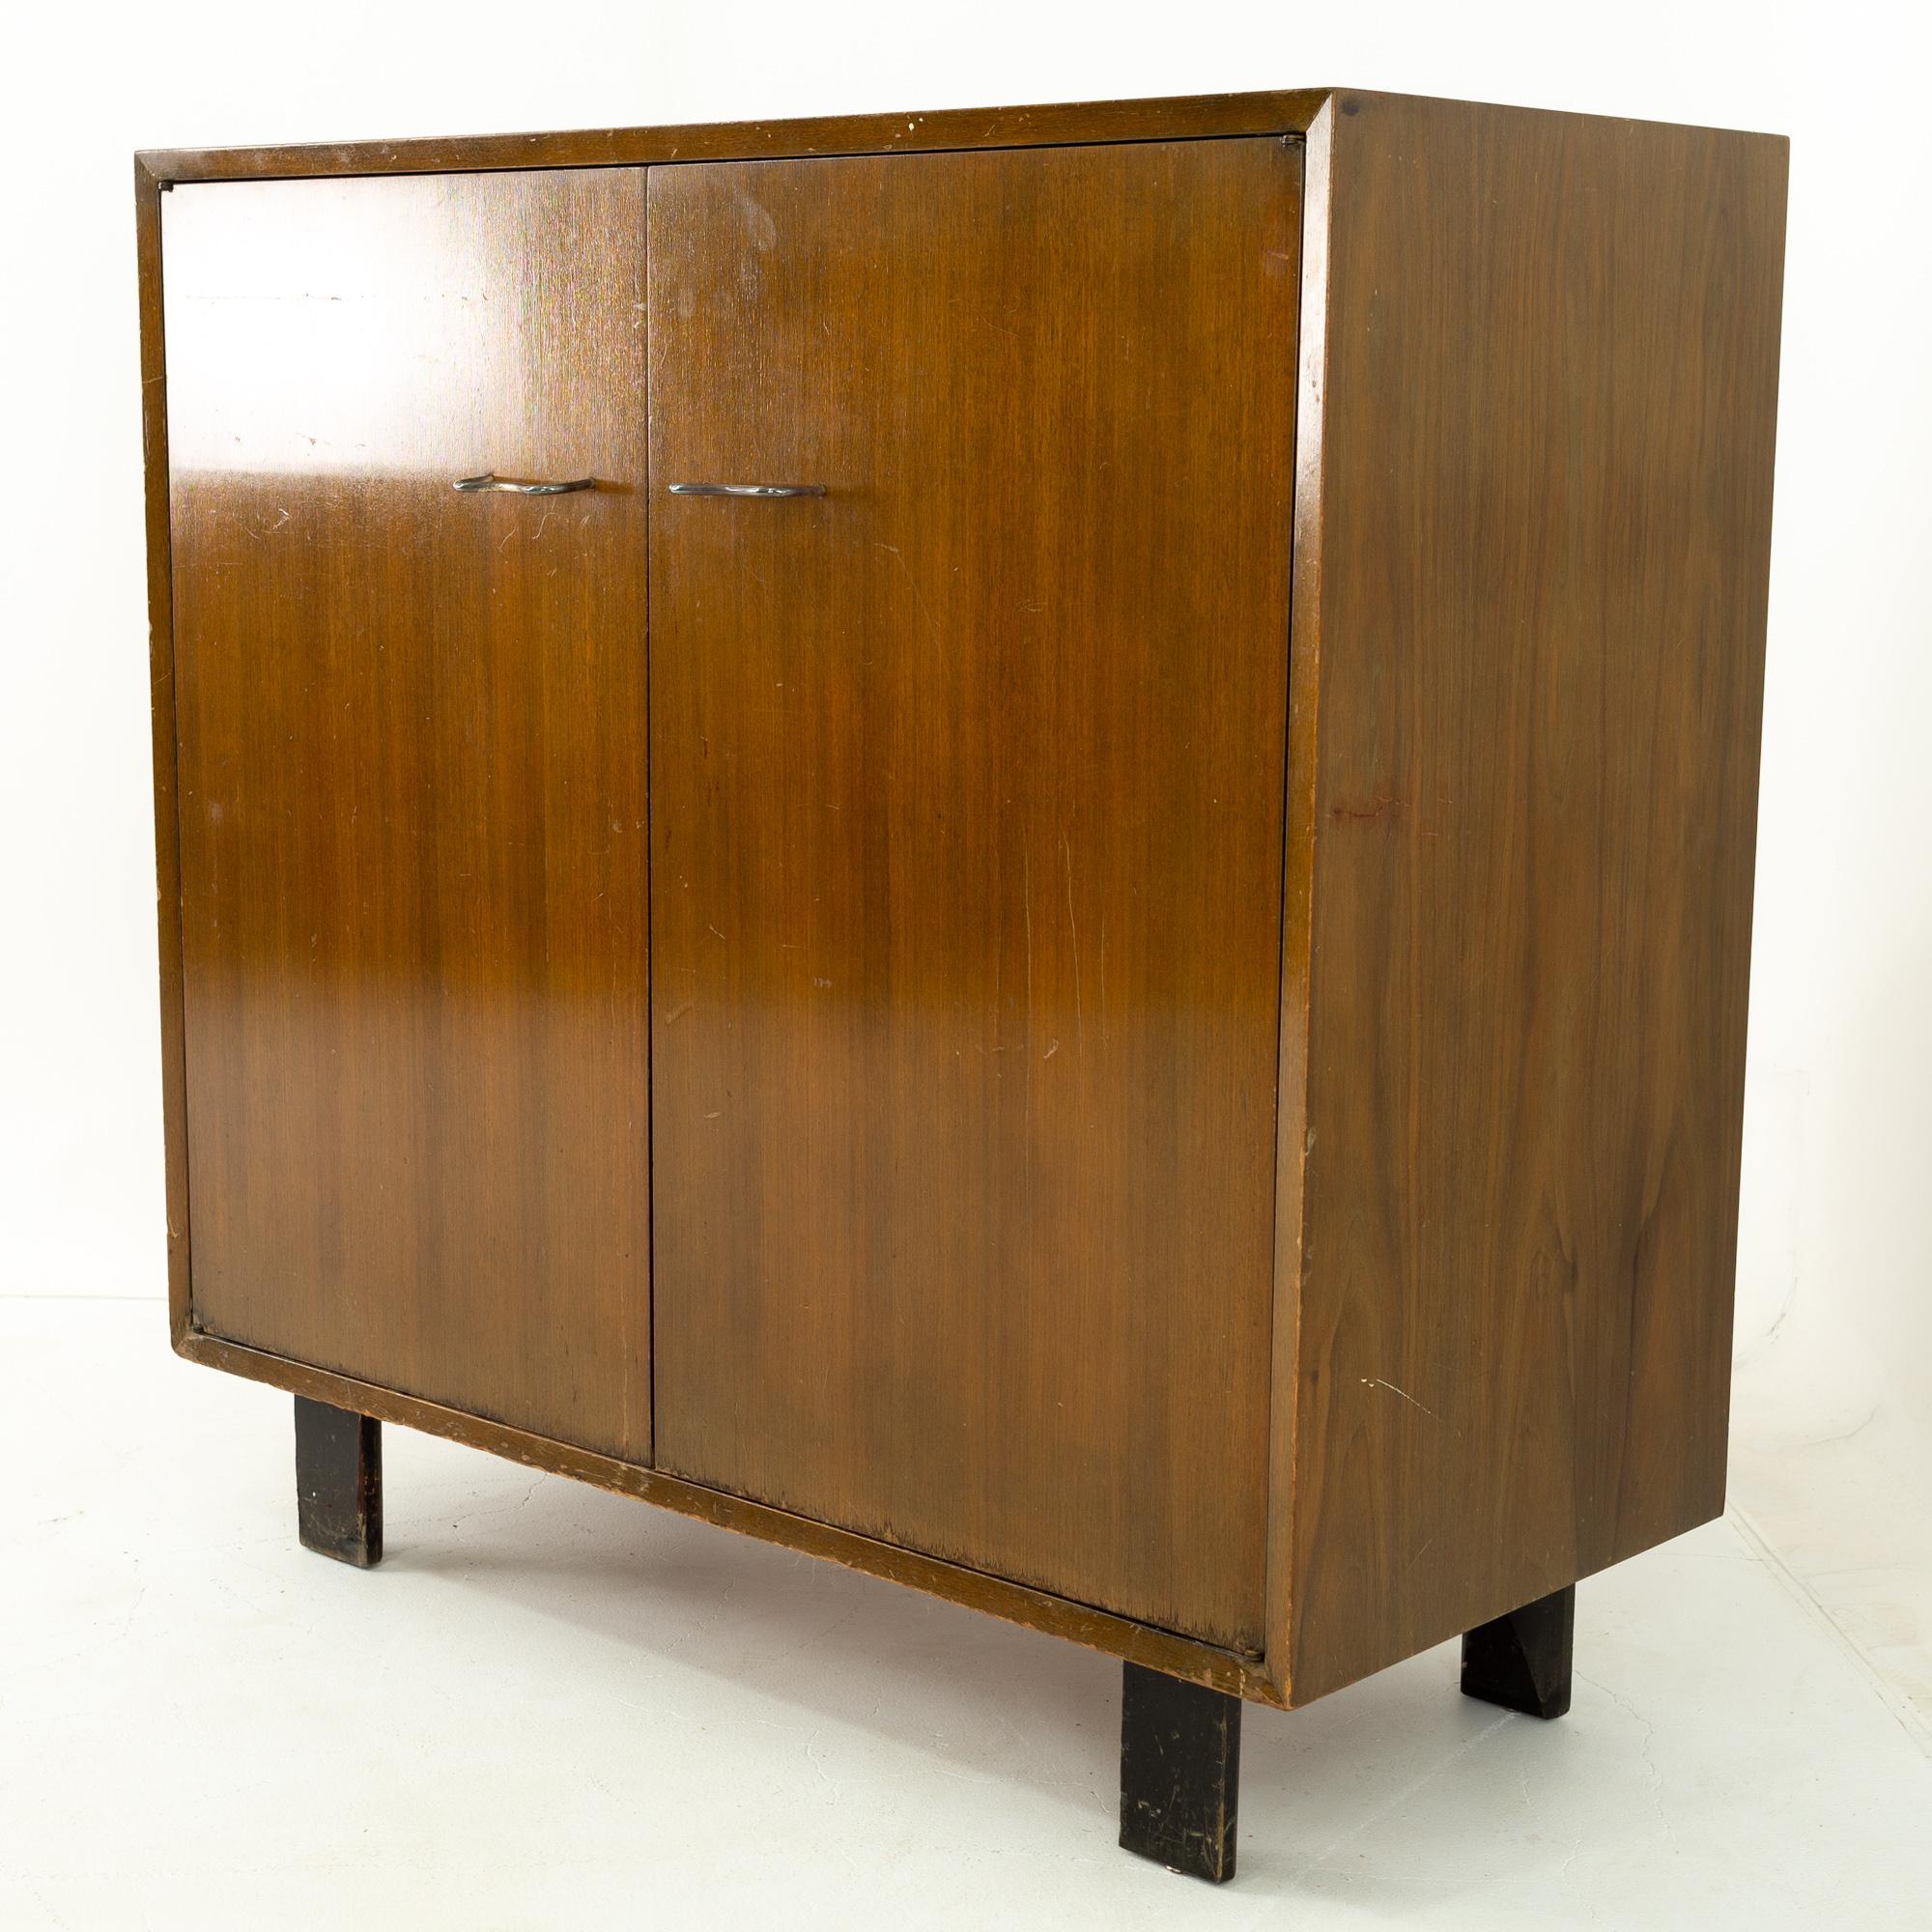 George Nelson for Herman Miller mid century 2 door media cabinet
Media cabinet is: 40 wide x 18.5 deep x 39.5 high

All pieces of furniture can be had in what we call restored vintage condition. That means the piece is restored upon purchase so